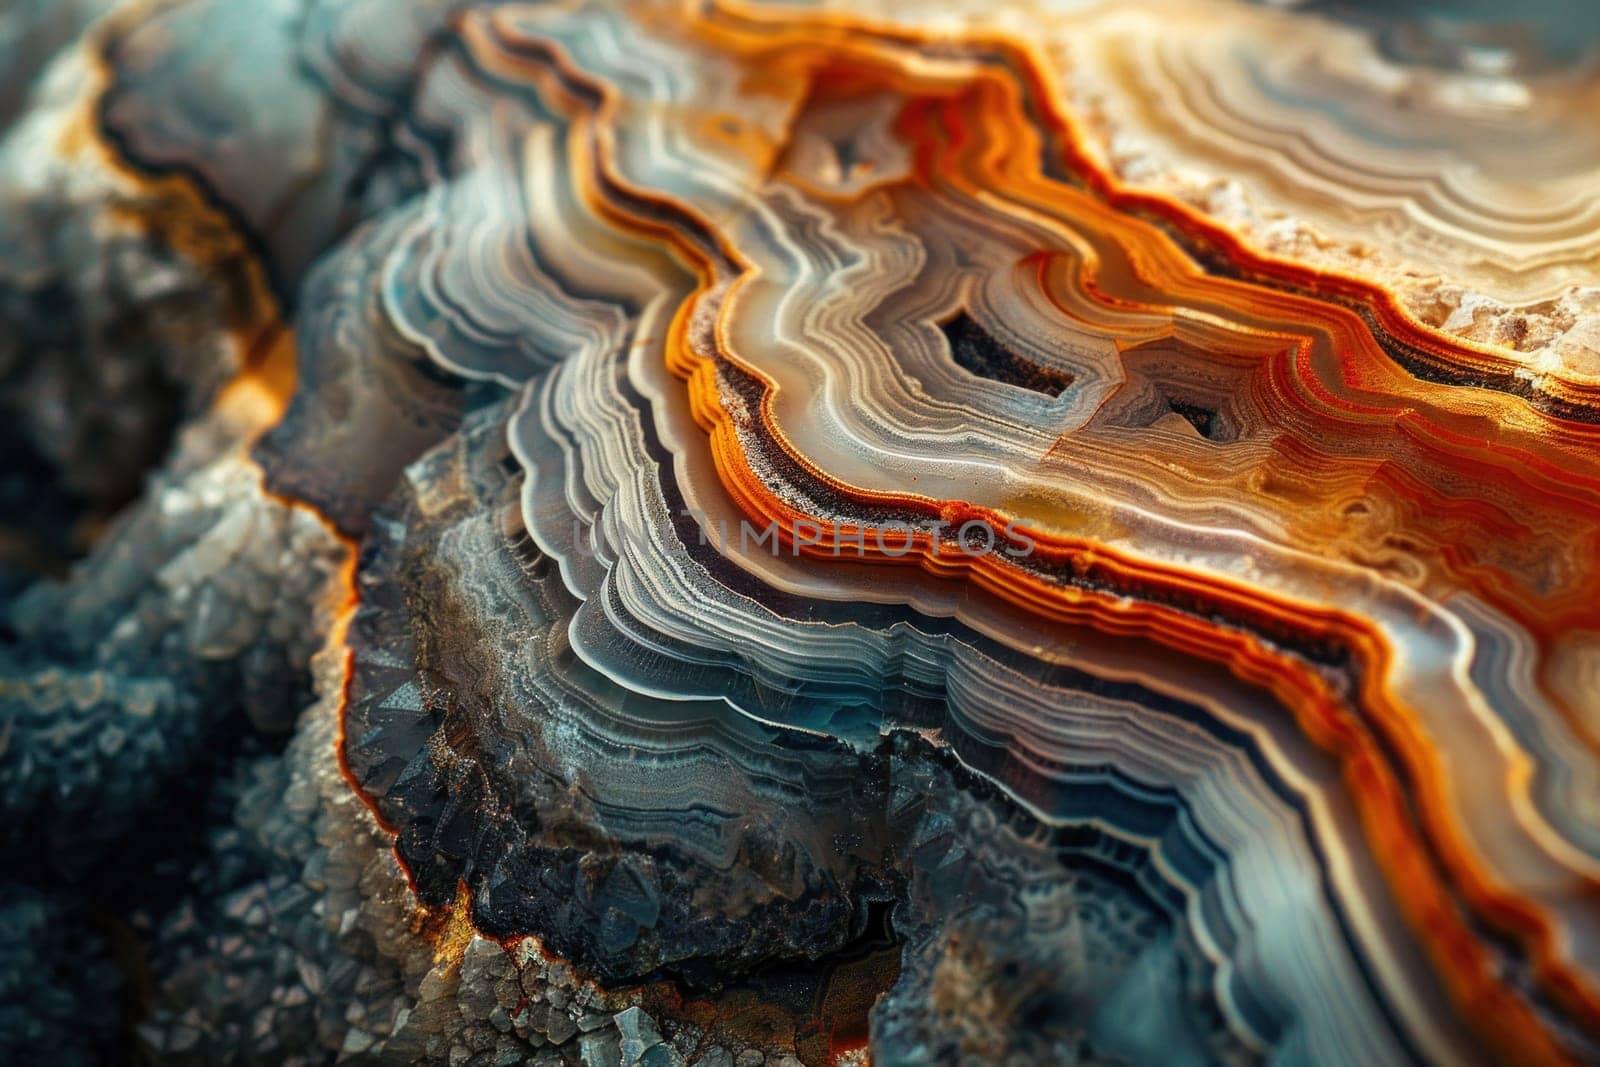 Colorful patterned rock close up view of nature's artwork with vibrant and intricate details by Vichizh